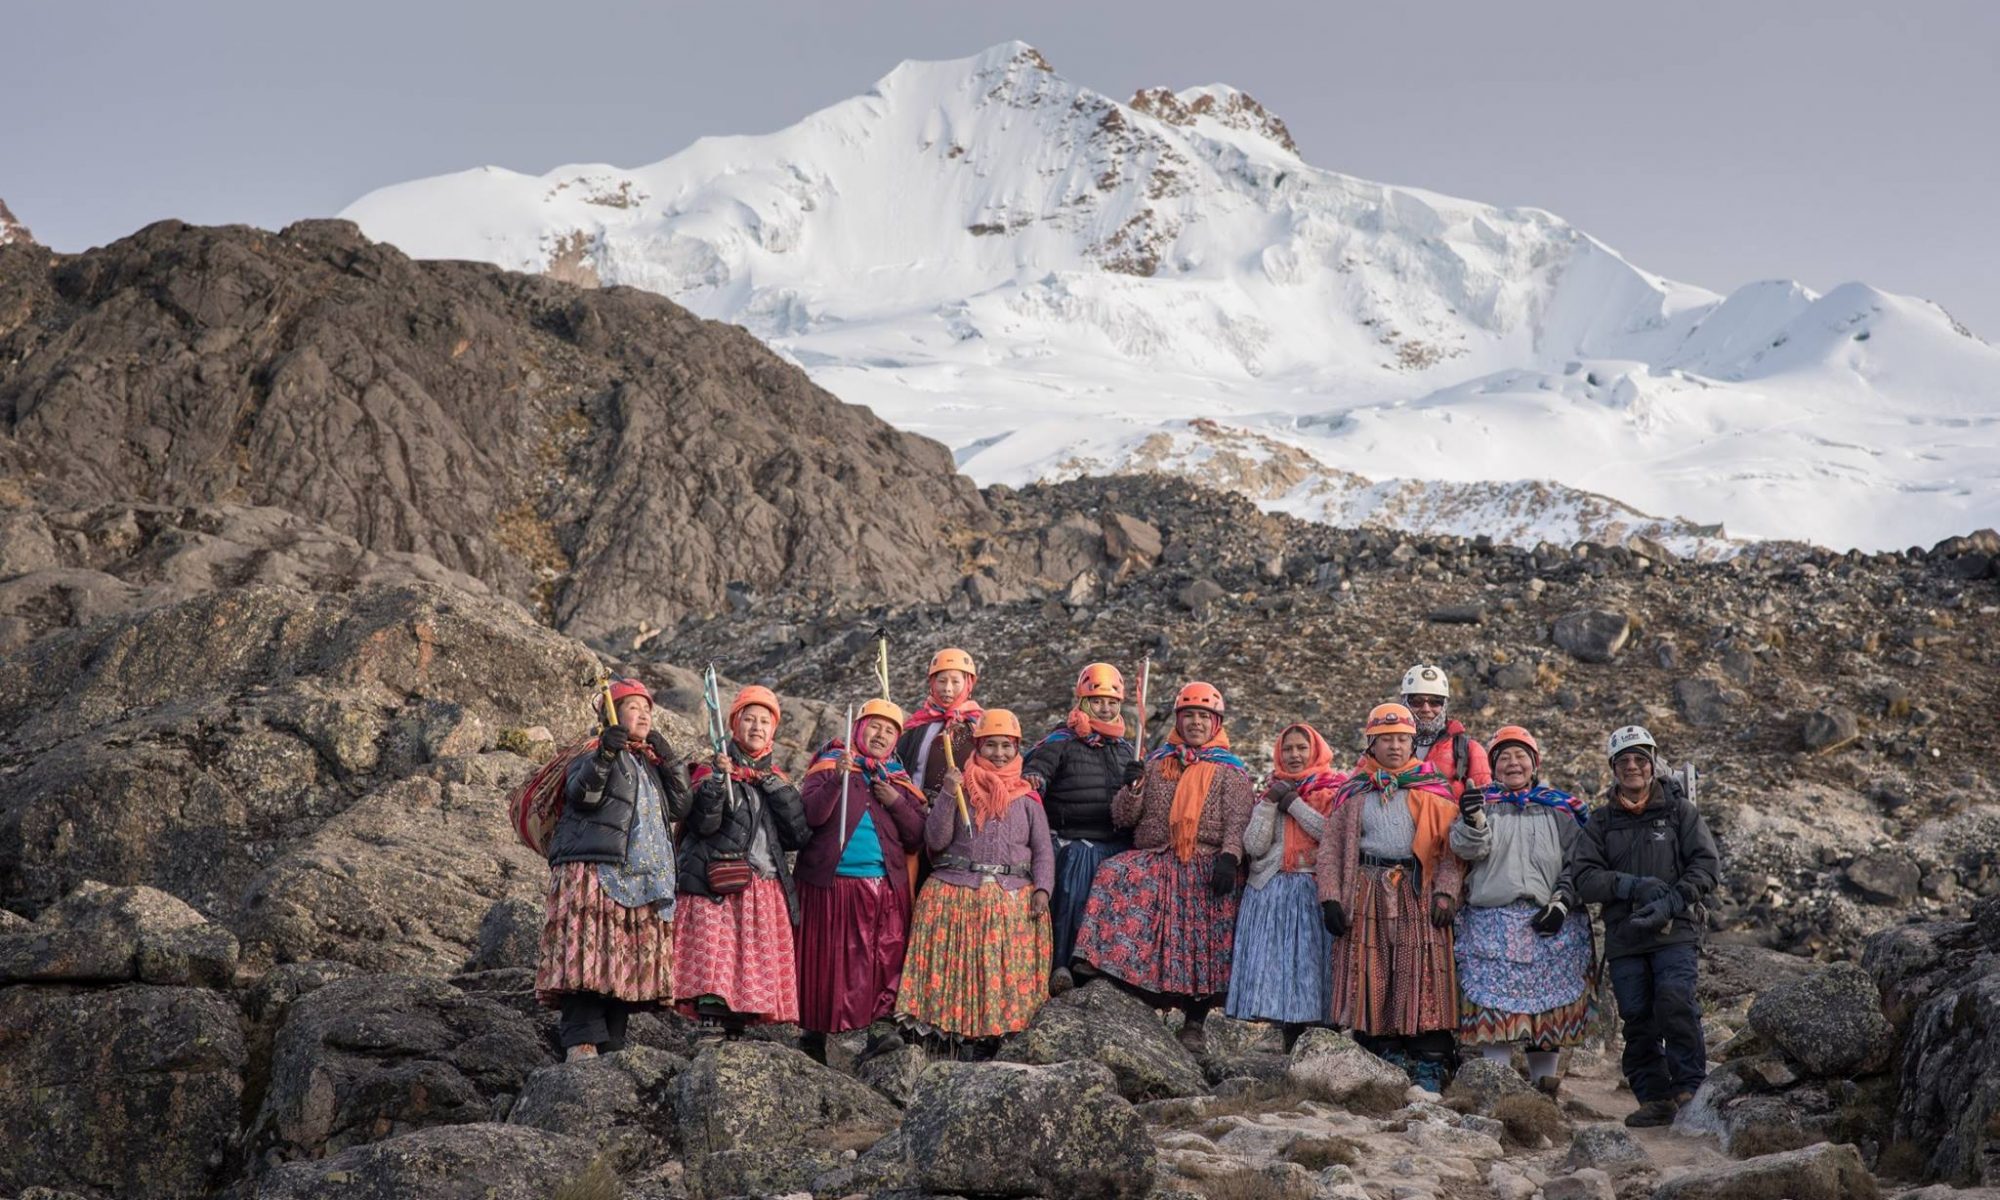 A group of Bolivian ‘Cholitas’ women to climb Aconcagua. Photo Marzena Wystrach Marchowska. Posted on their Facebook page.